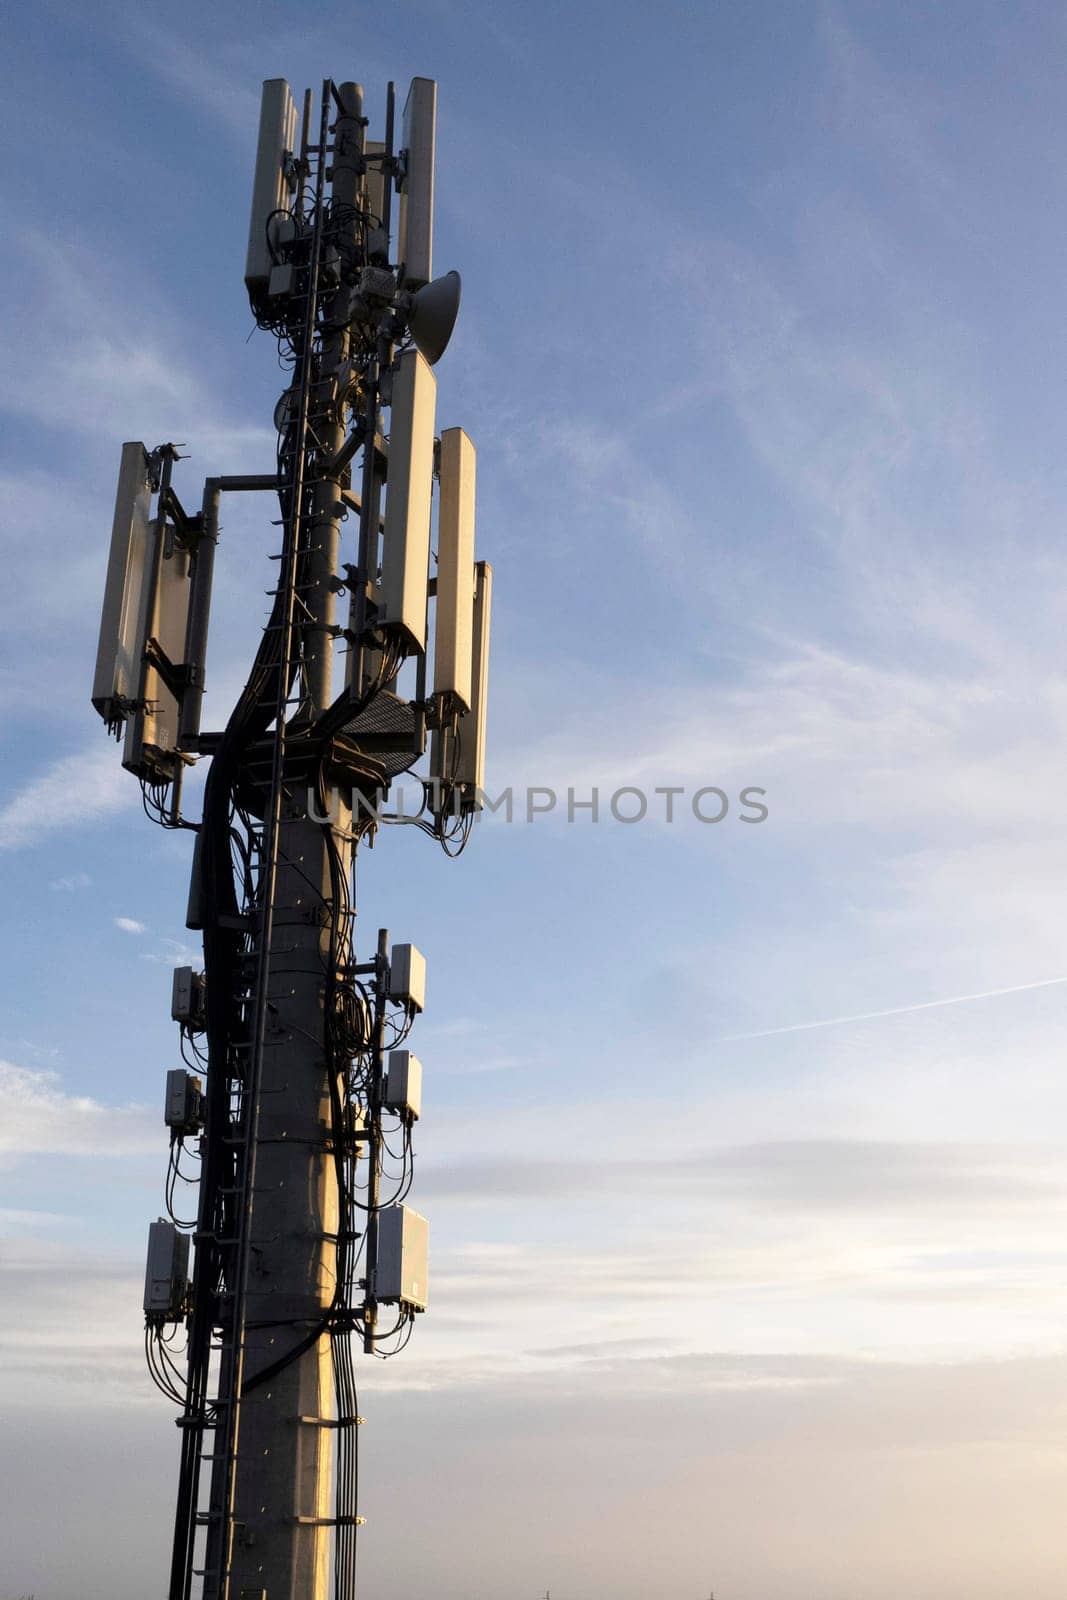 Aerial photographic documentation of a telephone repeater taken from another mountain 